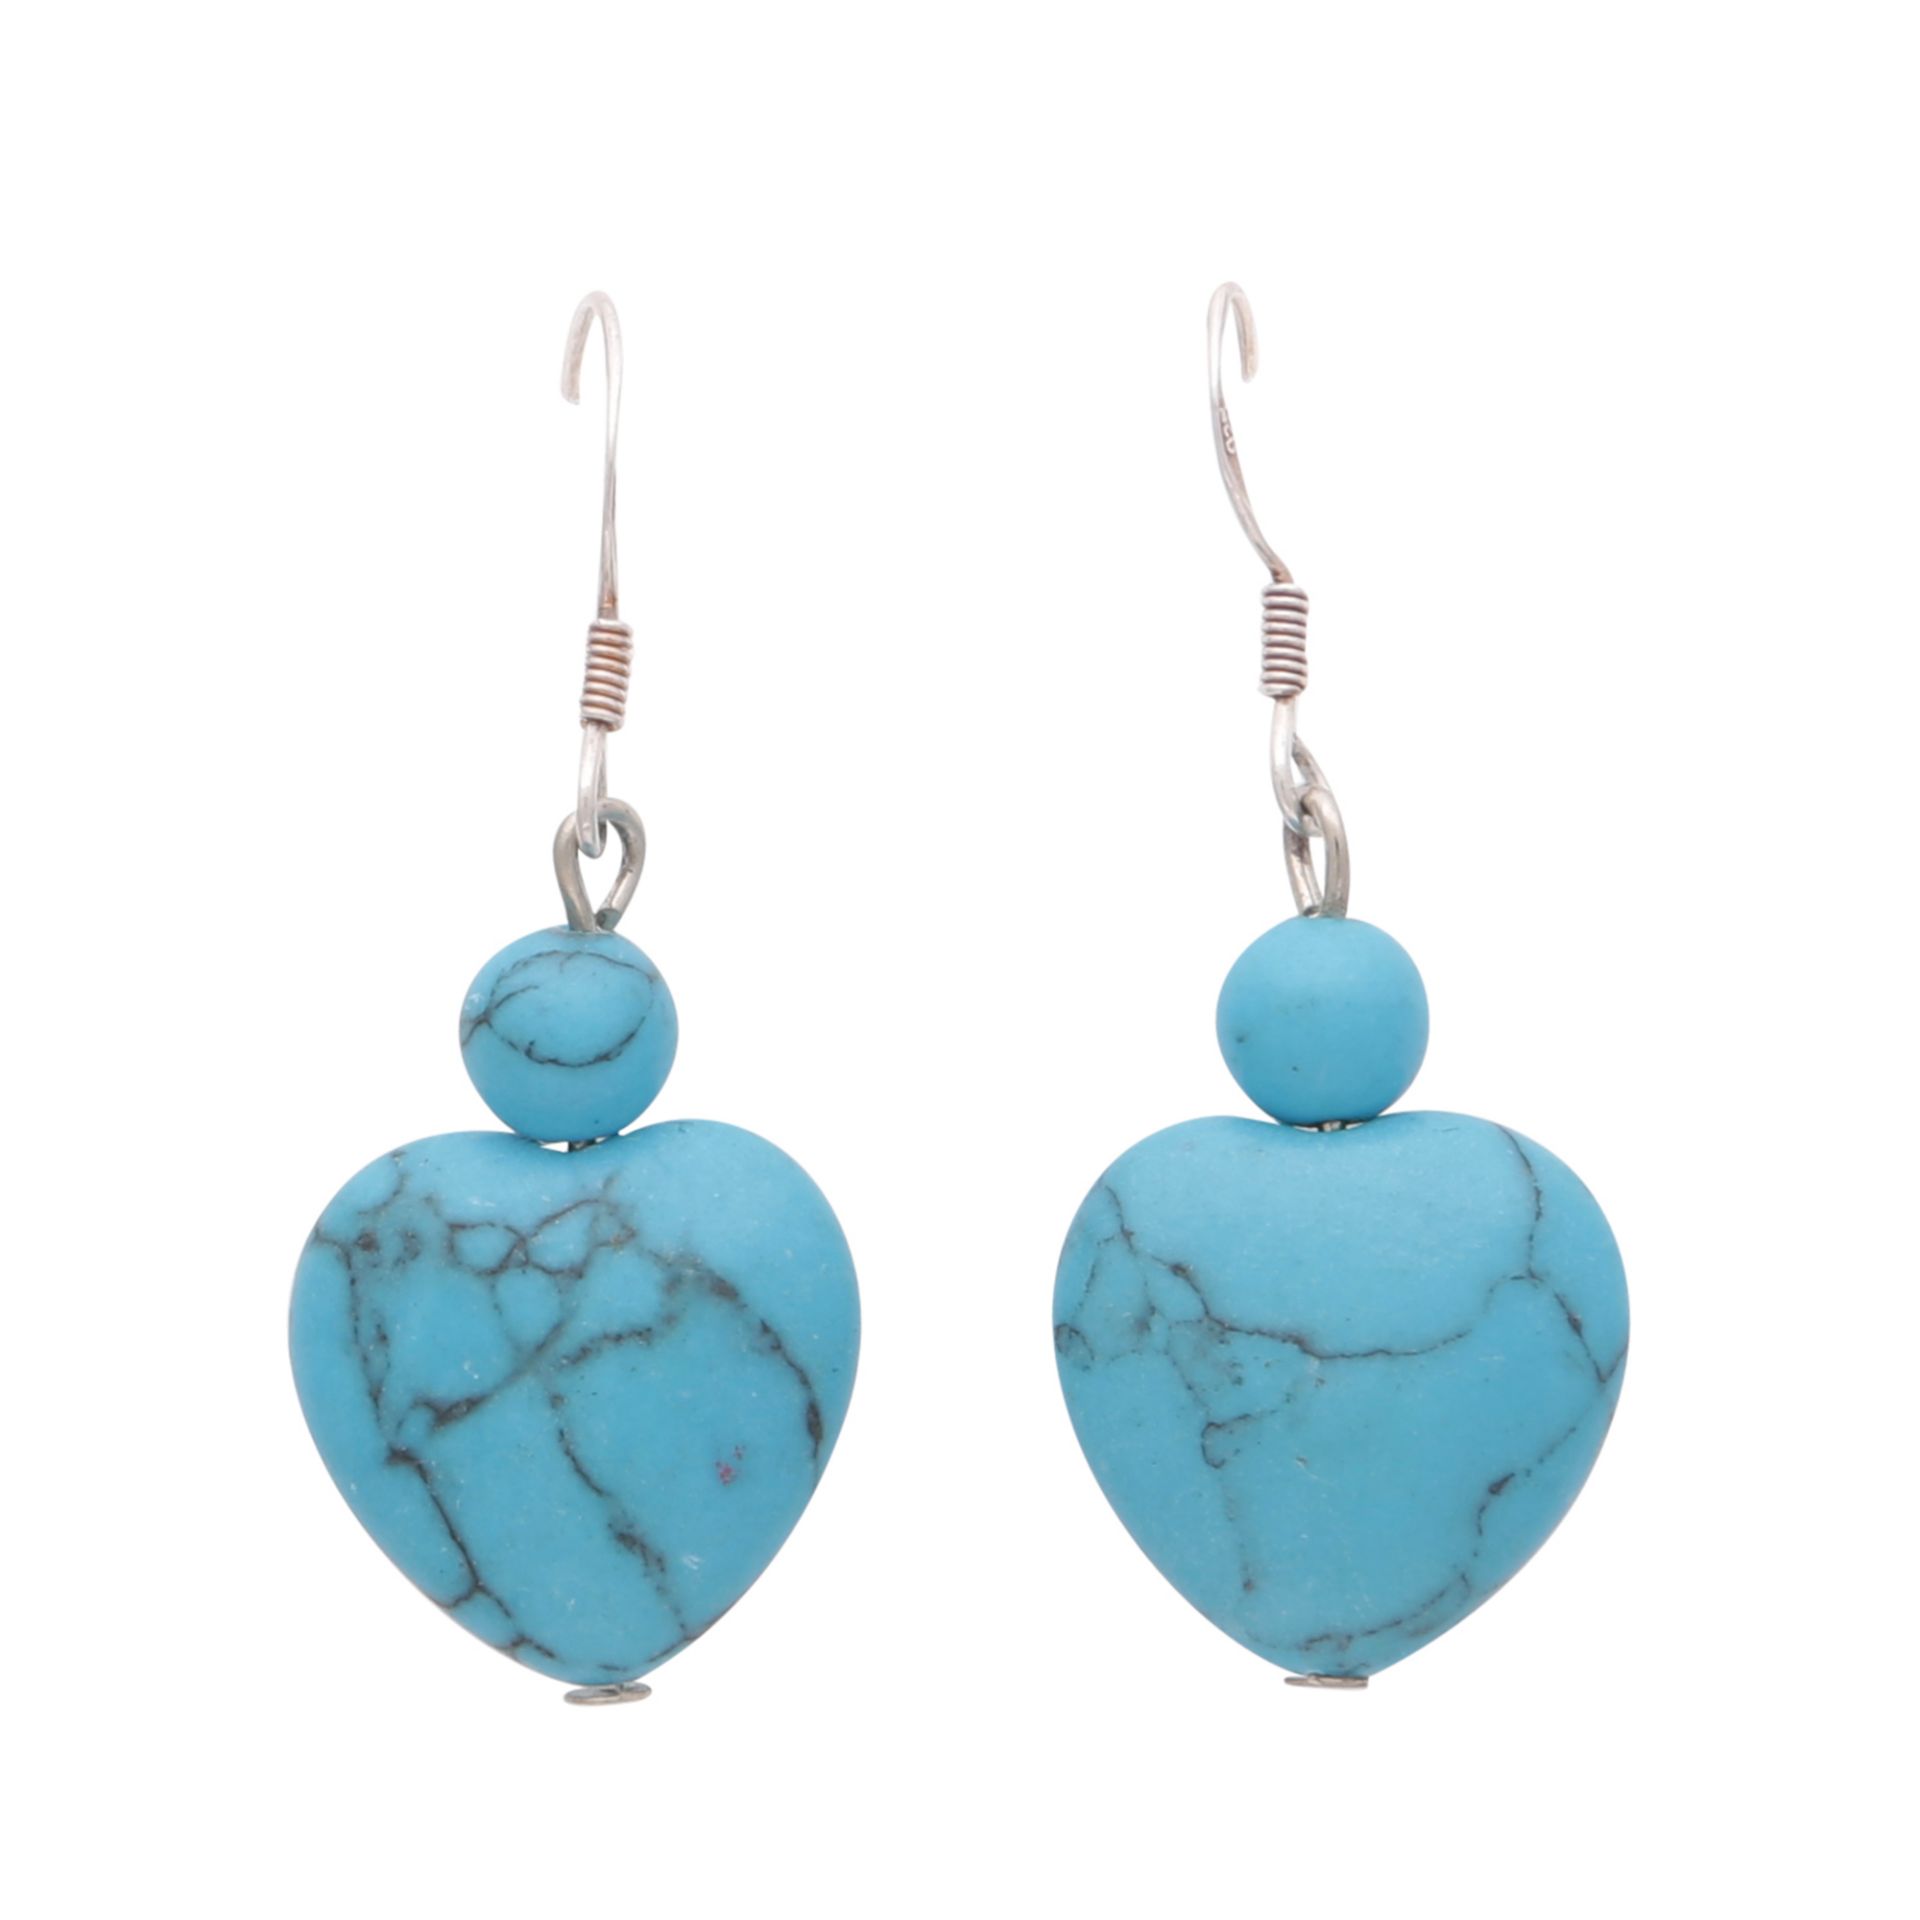 A pair of turquoise earrings each designed as a carved turquoise heart suspended below a bead from a